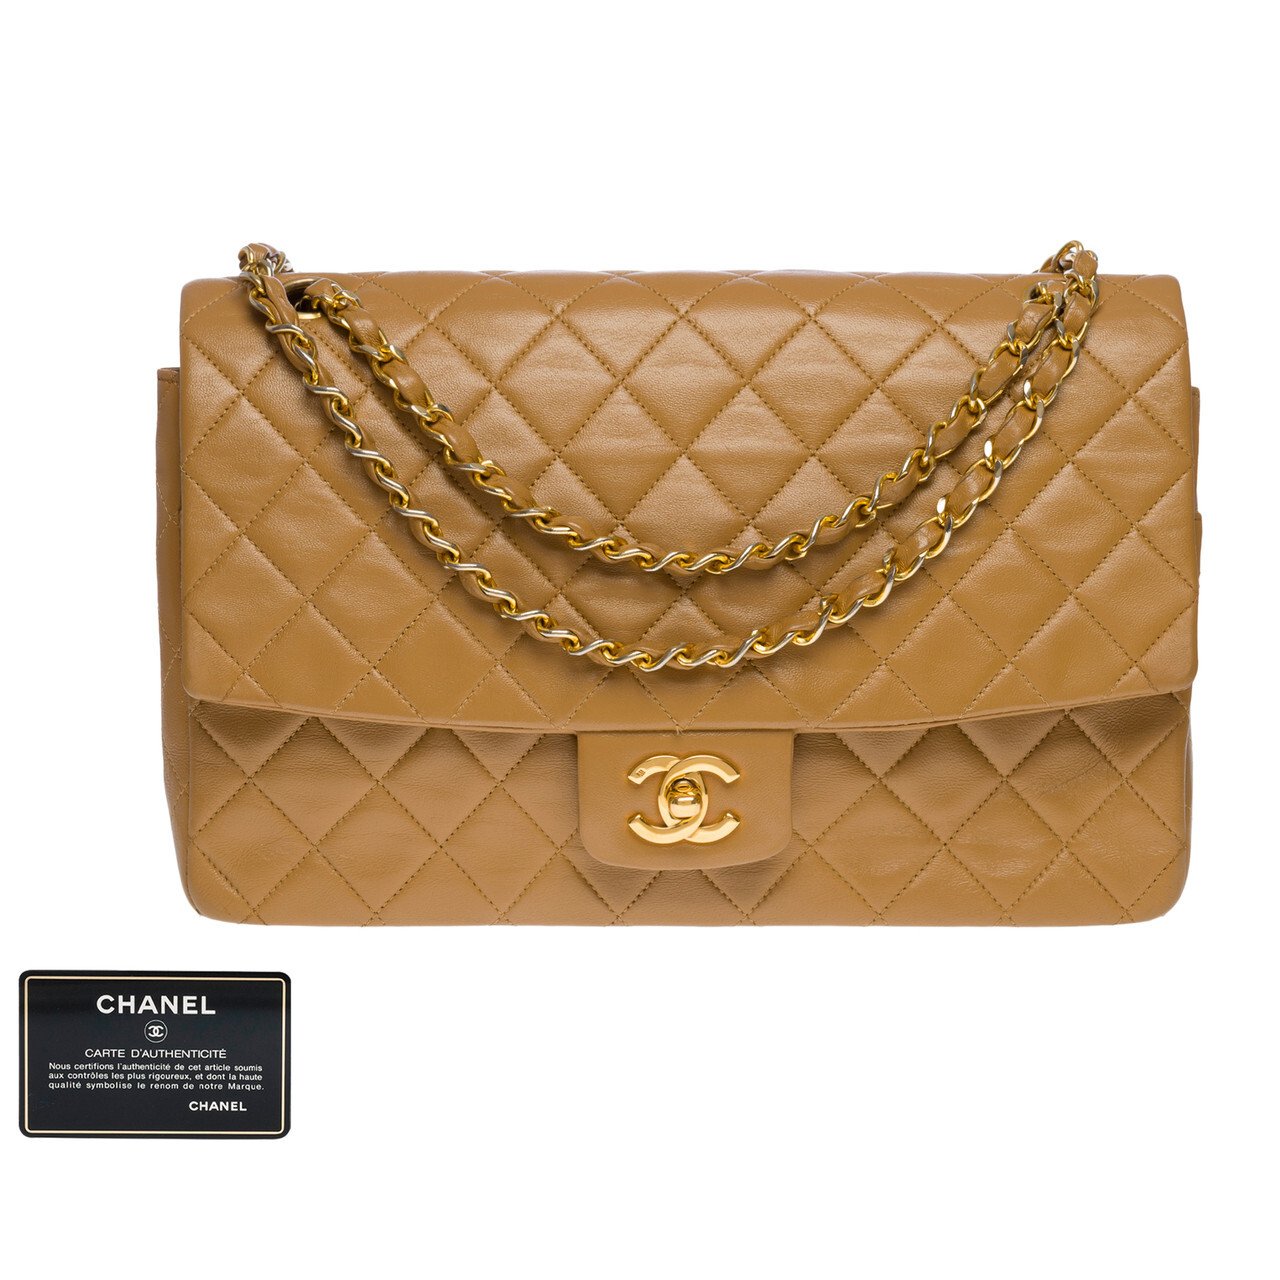 Chanel - Authenticated Handbag - Leather Beige Plain for Women, Very Good Condition